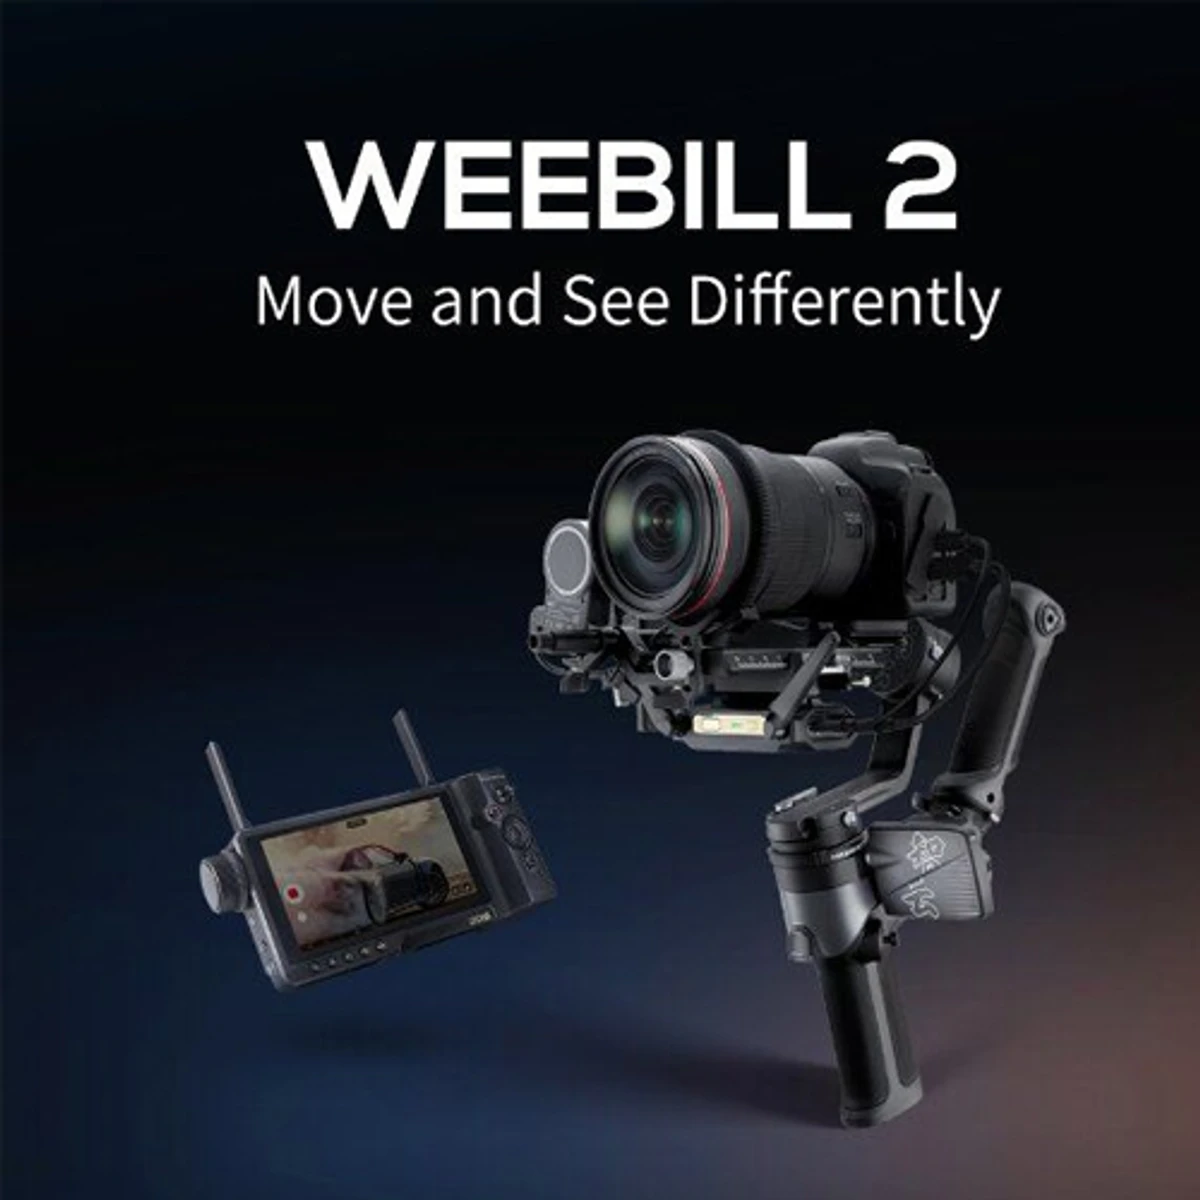 Zhiyun Weebill 2 3-Axis Gimbal Stabilizer With Rotating Touchscreen For DSLR And Mirrorless Camera